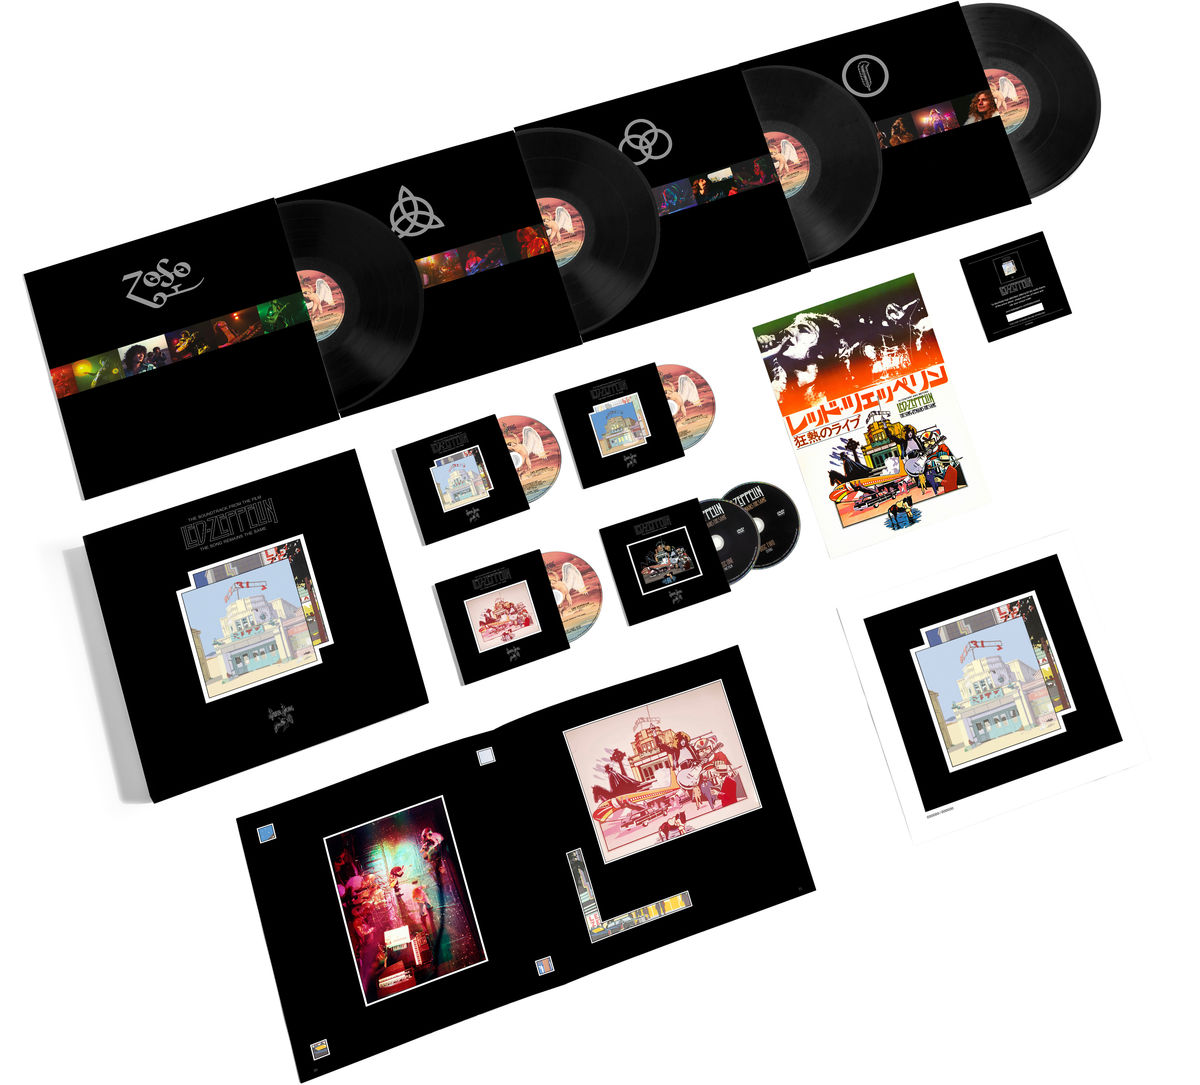 Disques vinyle Pop Rock Warner Music Led Zeppelin - The Song Remains The Same (2 CD + 4 LP + 3 DVD)